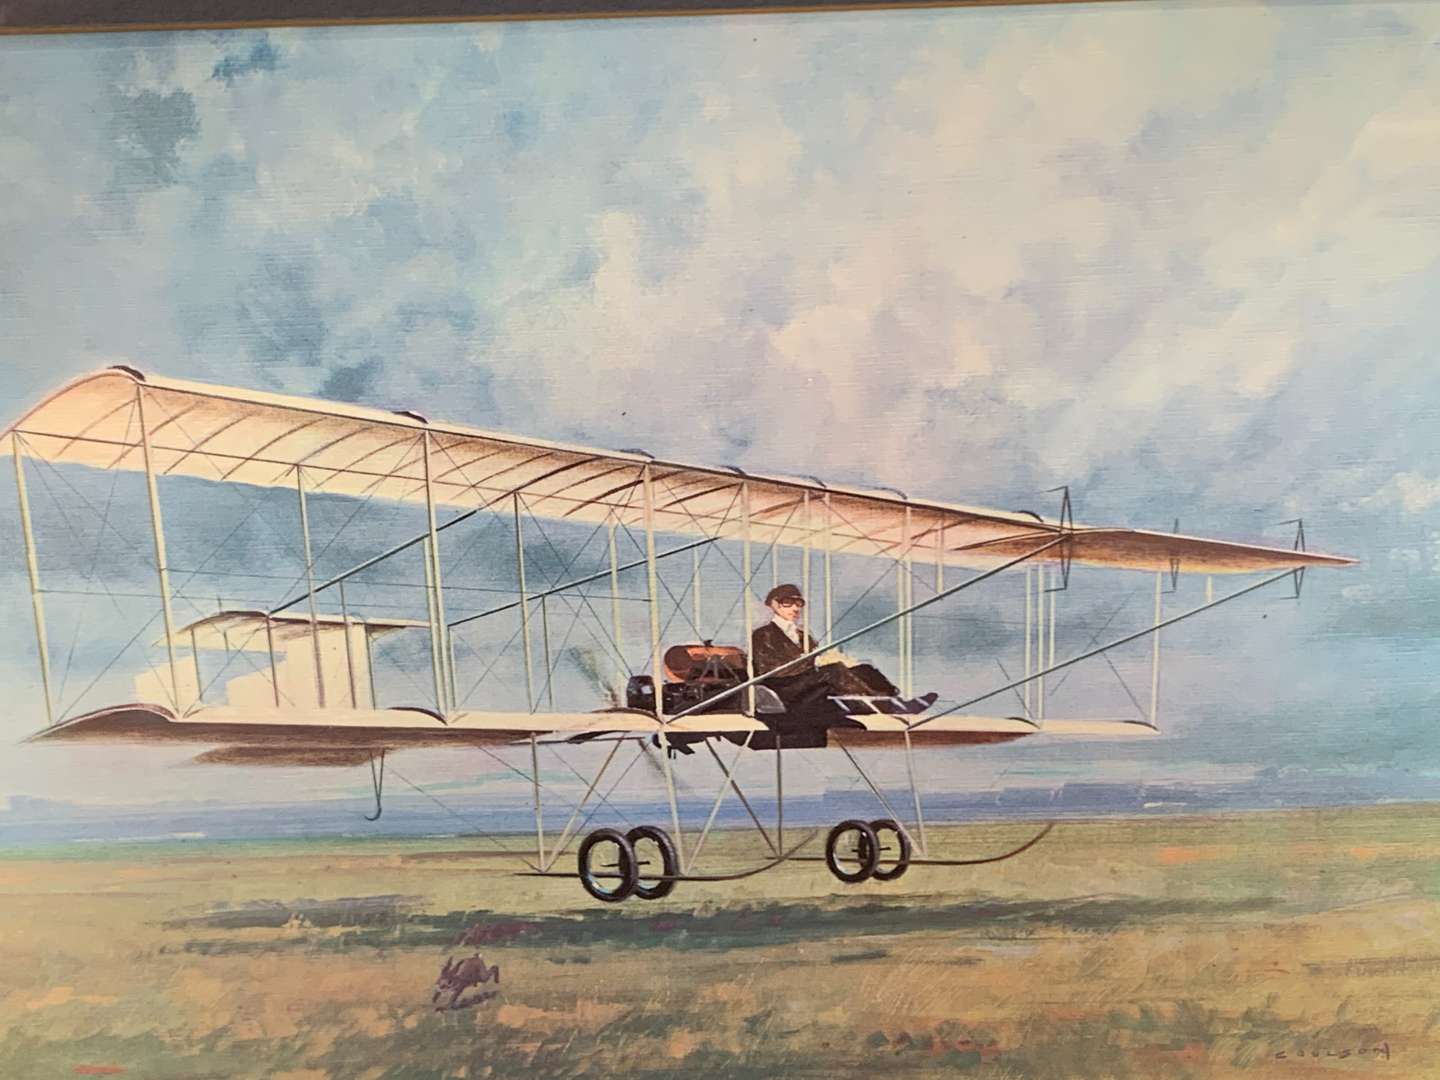 <p>Coulson Framed Print of The Wright Brothers&nbsp;</p>